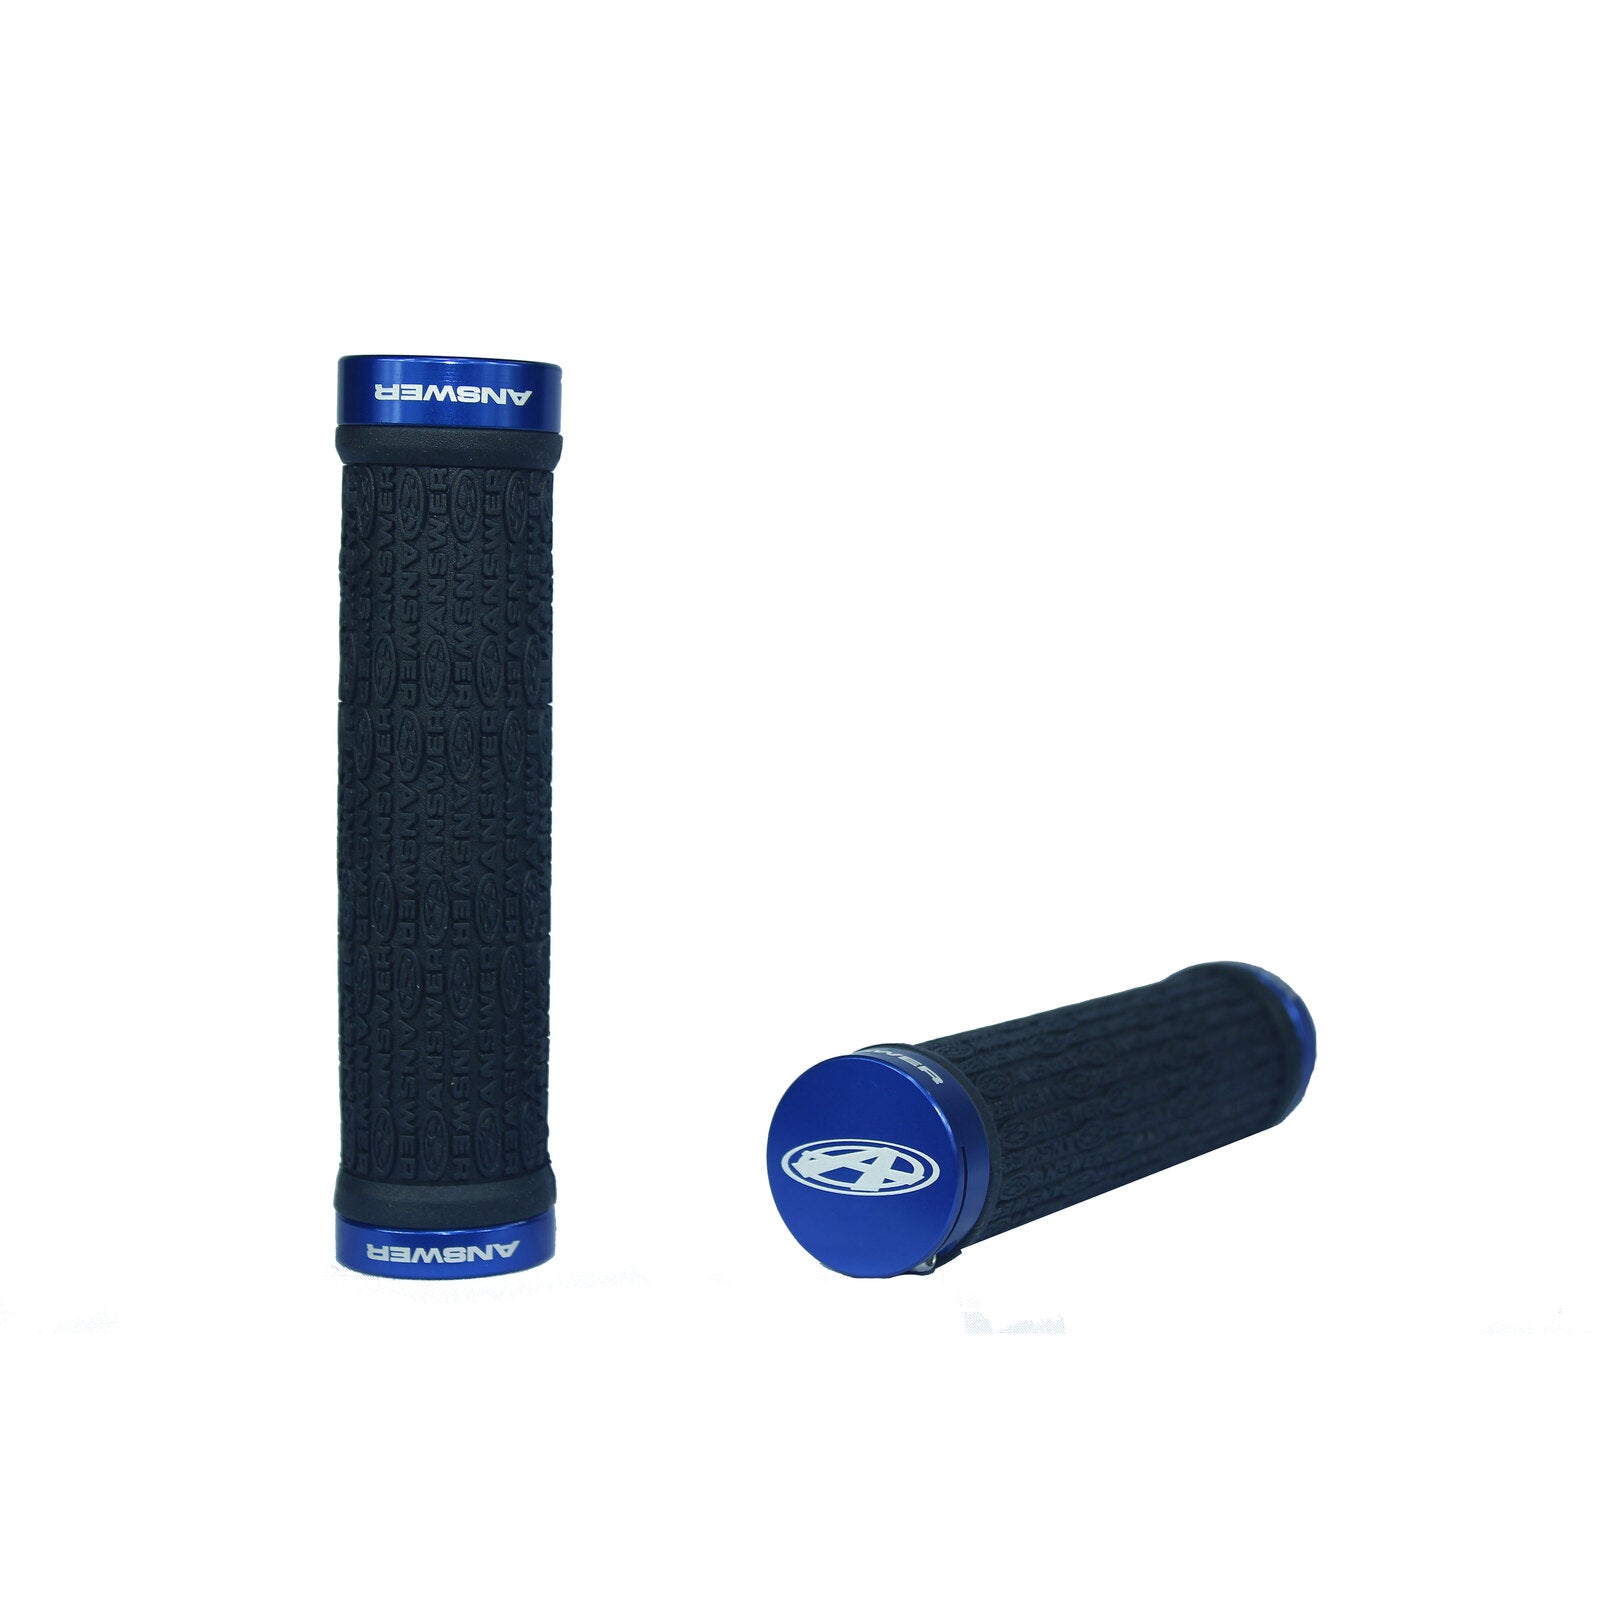 A pair of Answer Mini Lock-On Flangless Grips in black and blue on a white background.